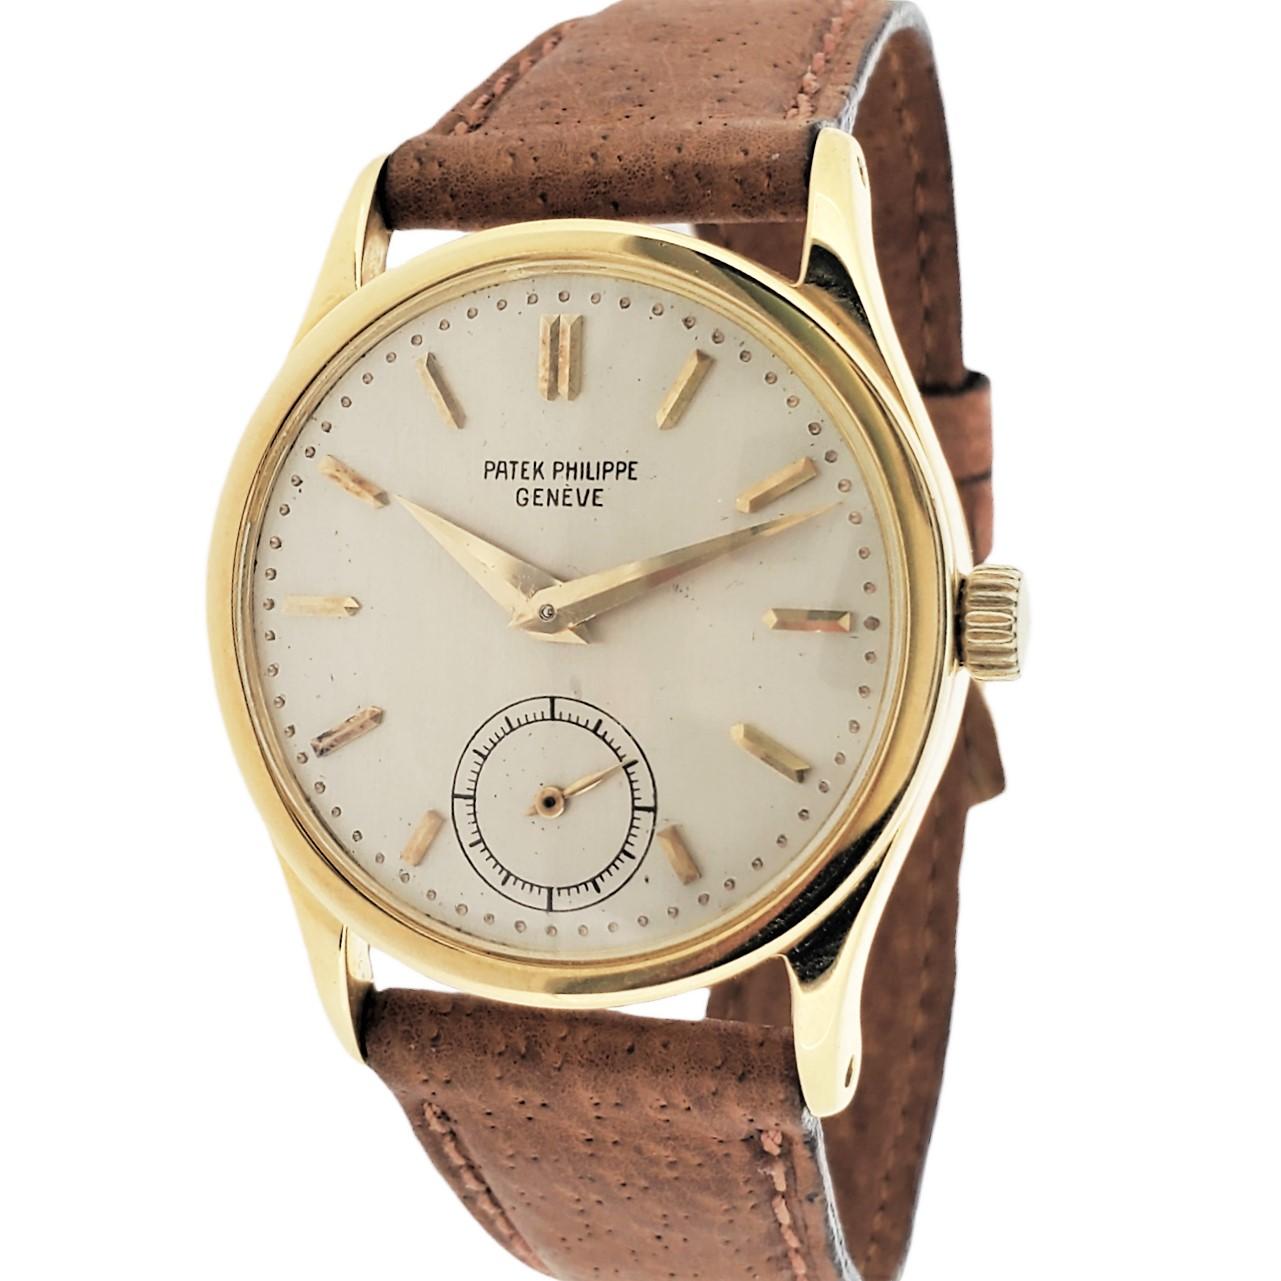 Introduction:
Patek Philippe 96J Calatrava watch.  The watch is made in 18K yellow gold and the case measures 30.5 mm and is fitted with a 12 AM 400 caliber manual wind movement # 732471; Case # 313810.  The watch has a silvered white dial with